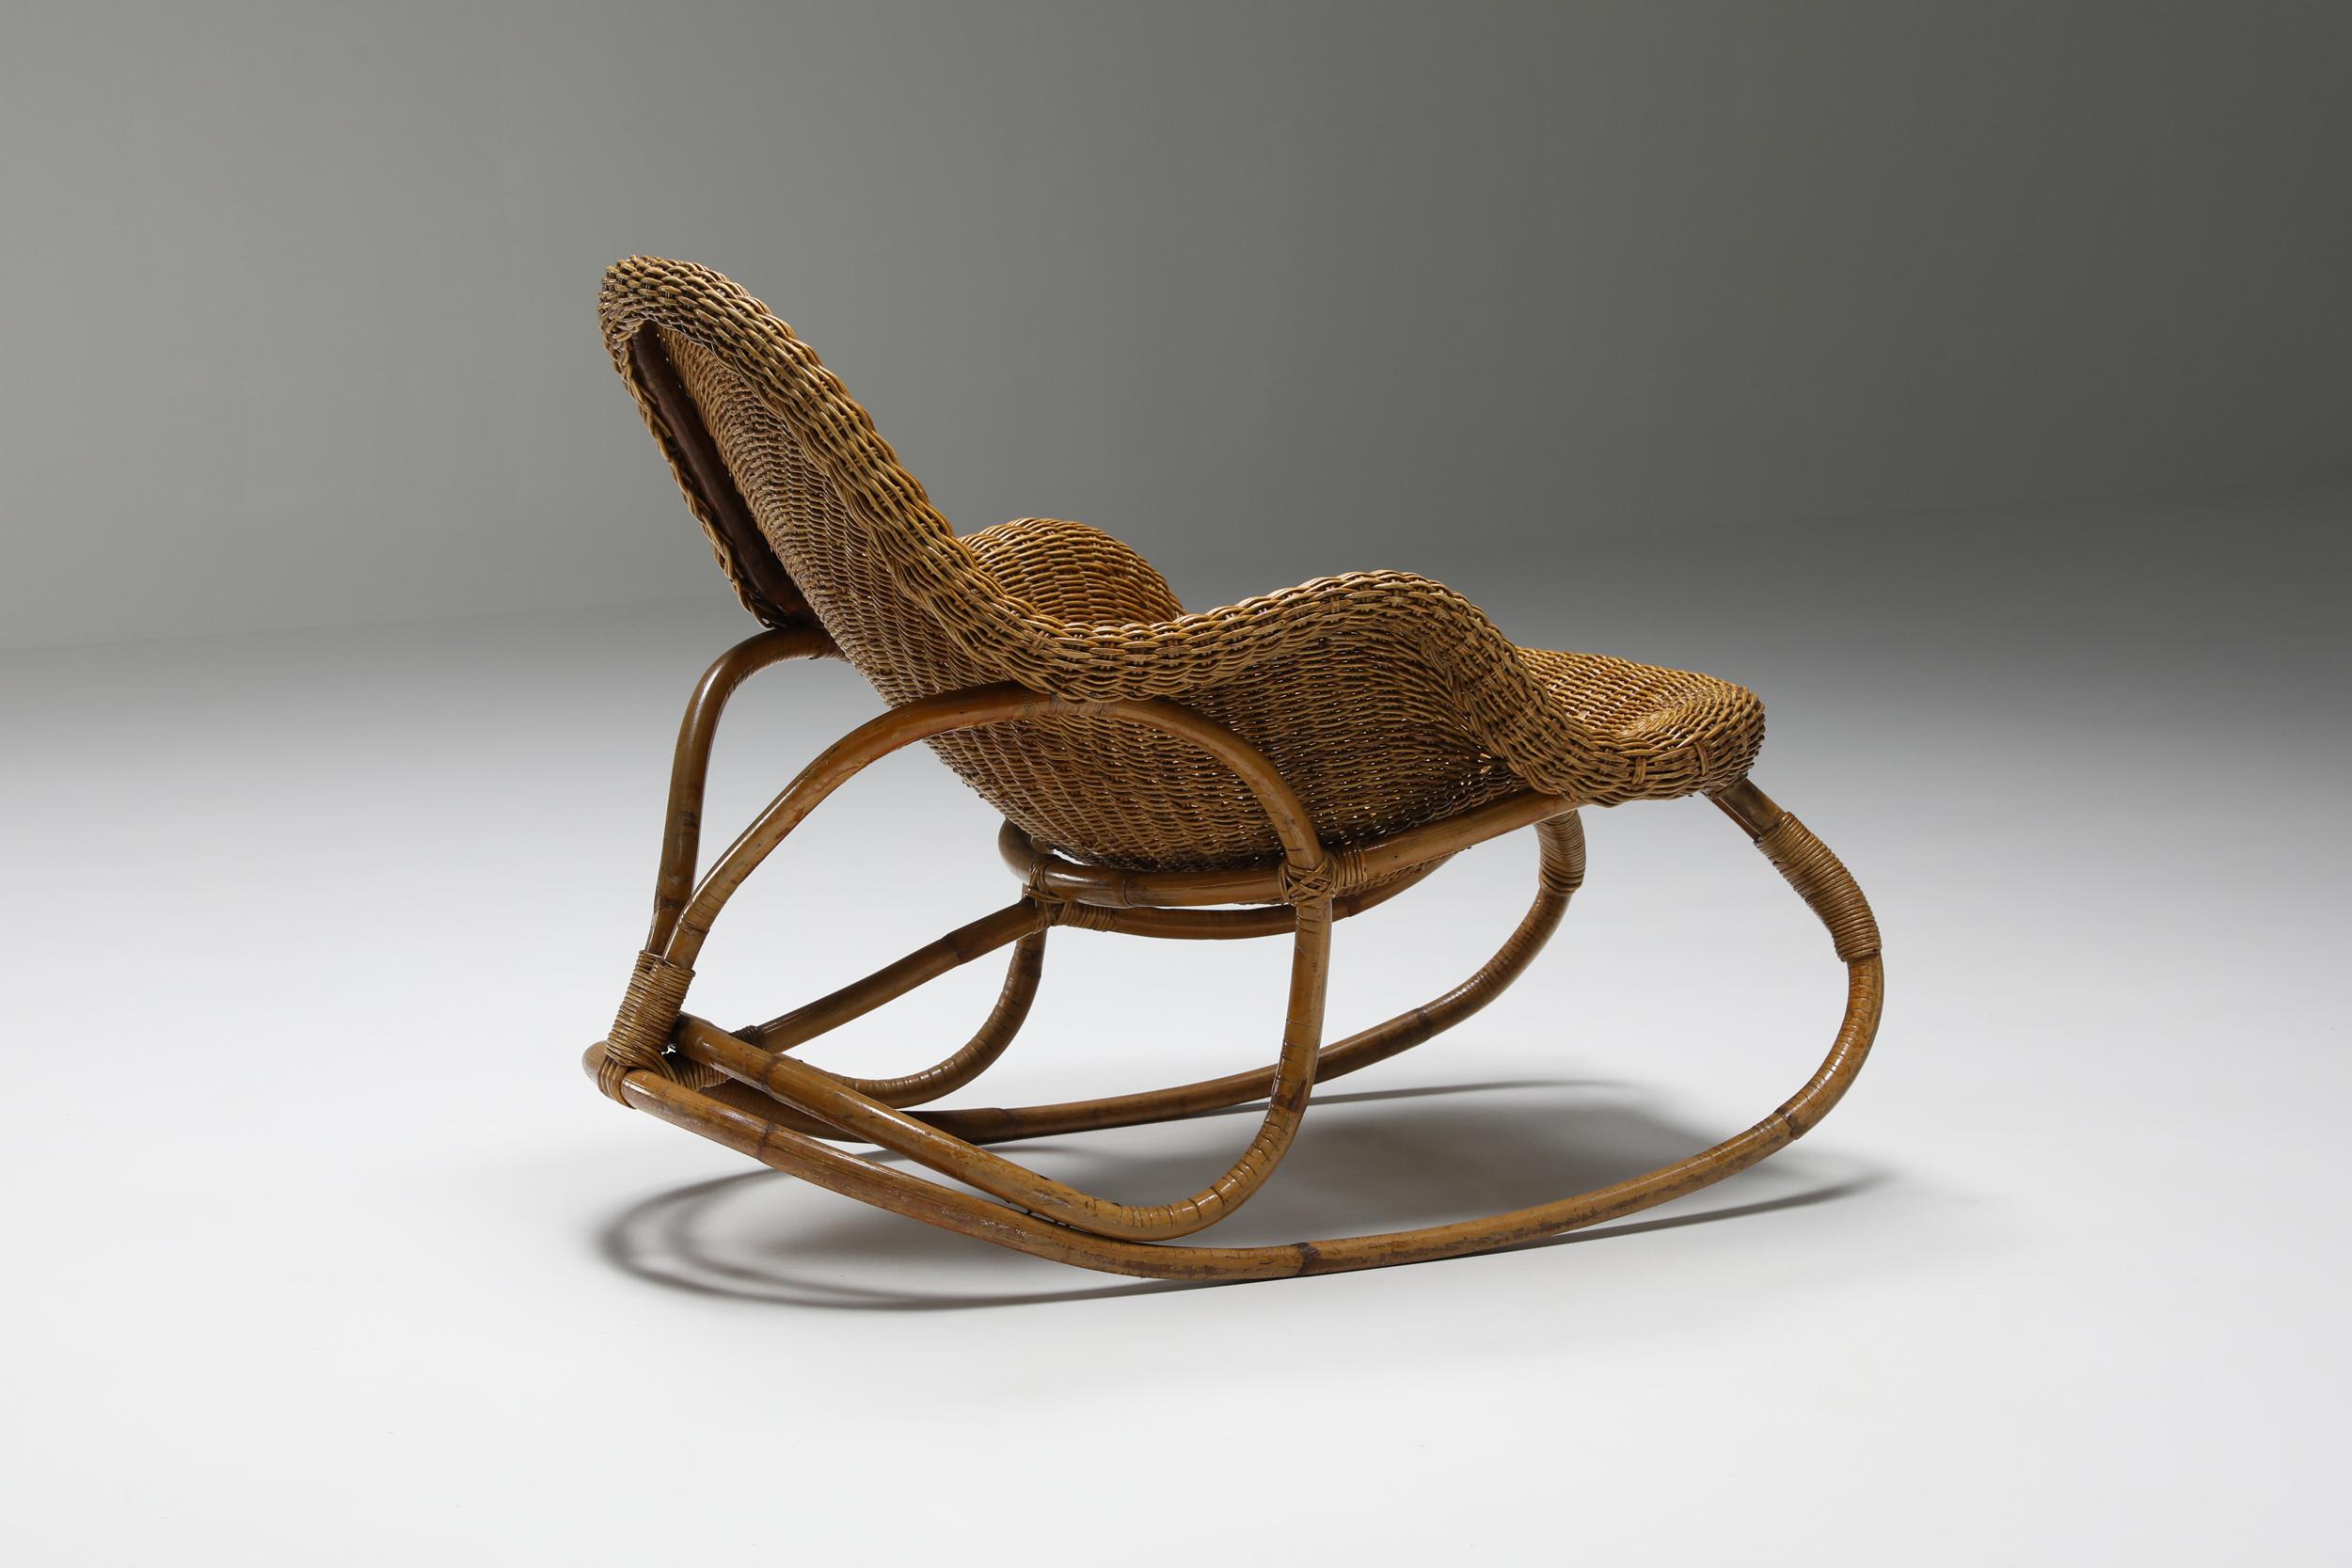 French Wicker Rocking Chair Art Nouveau, France, Victor Horta, Organic, 1905